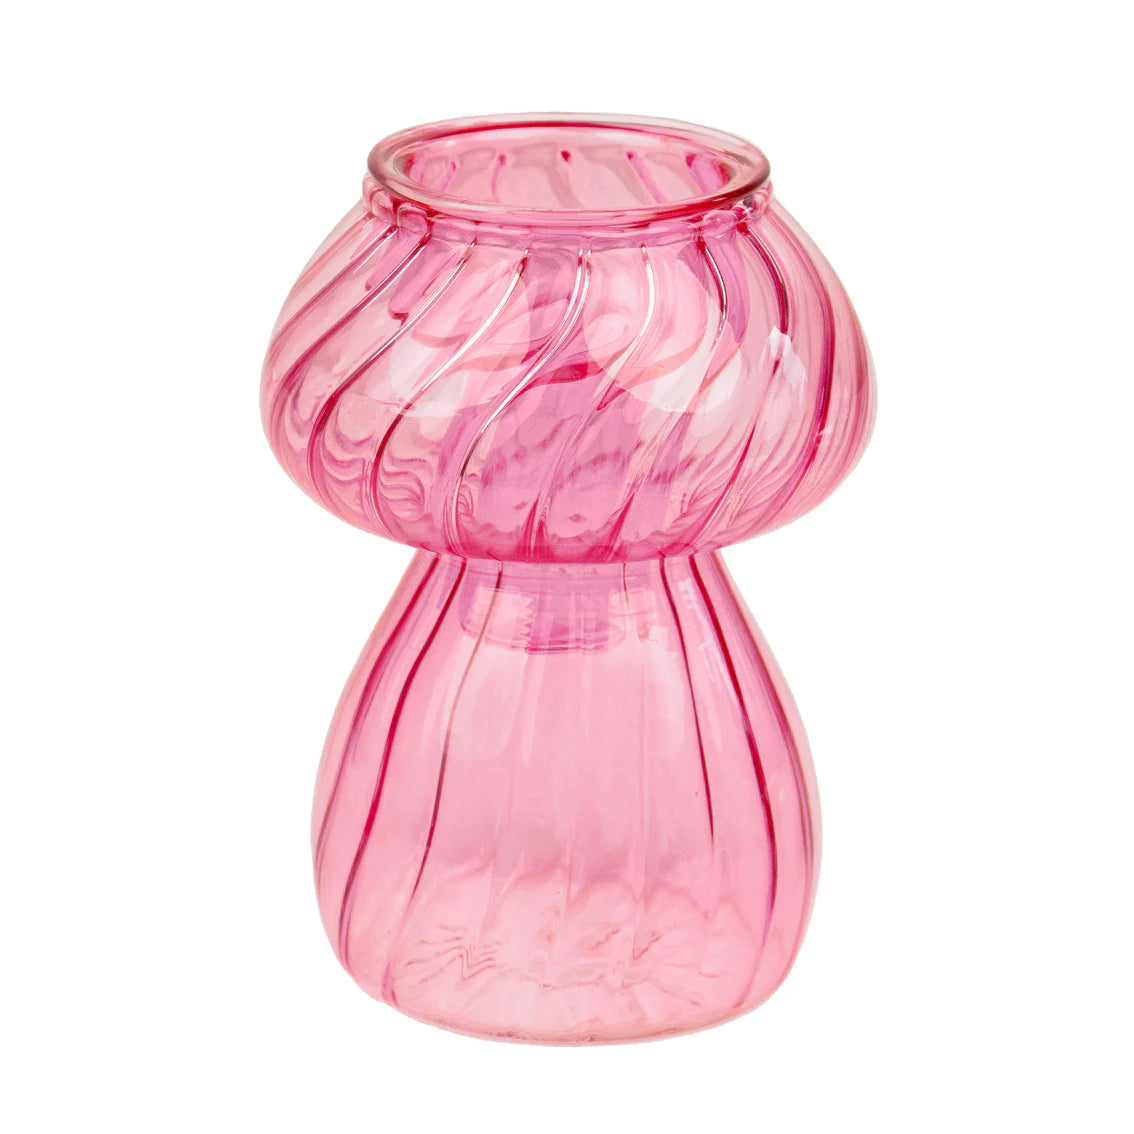 Mushroom shaped glass candle in soft pink.